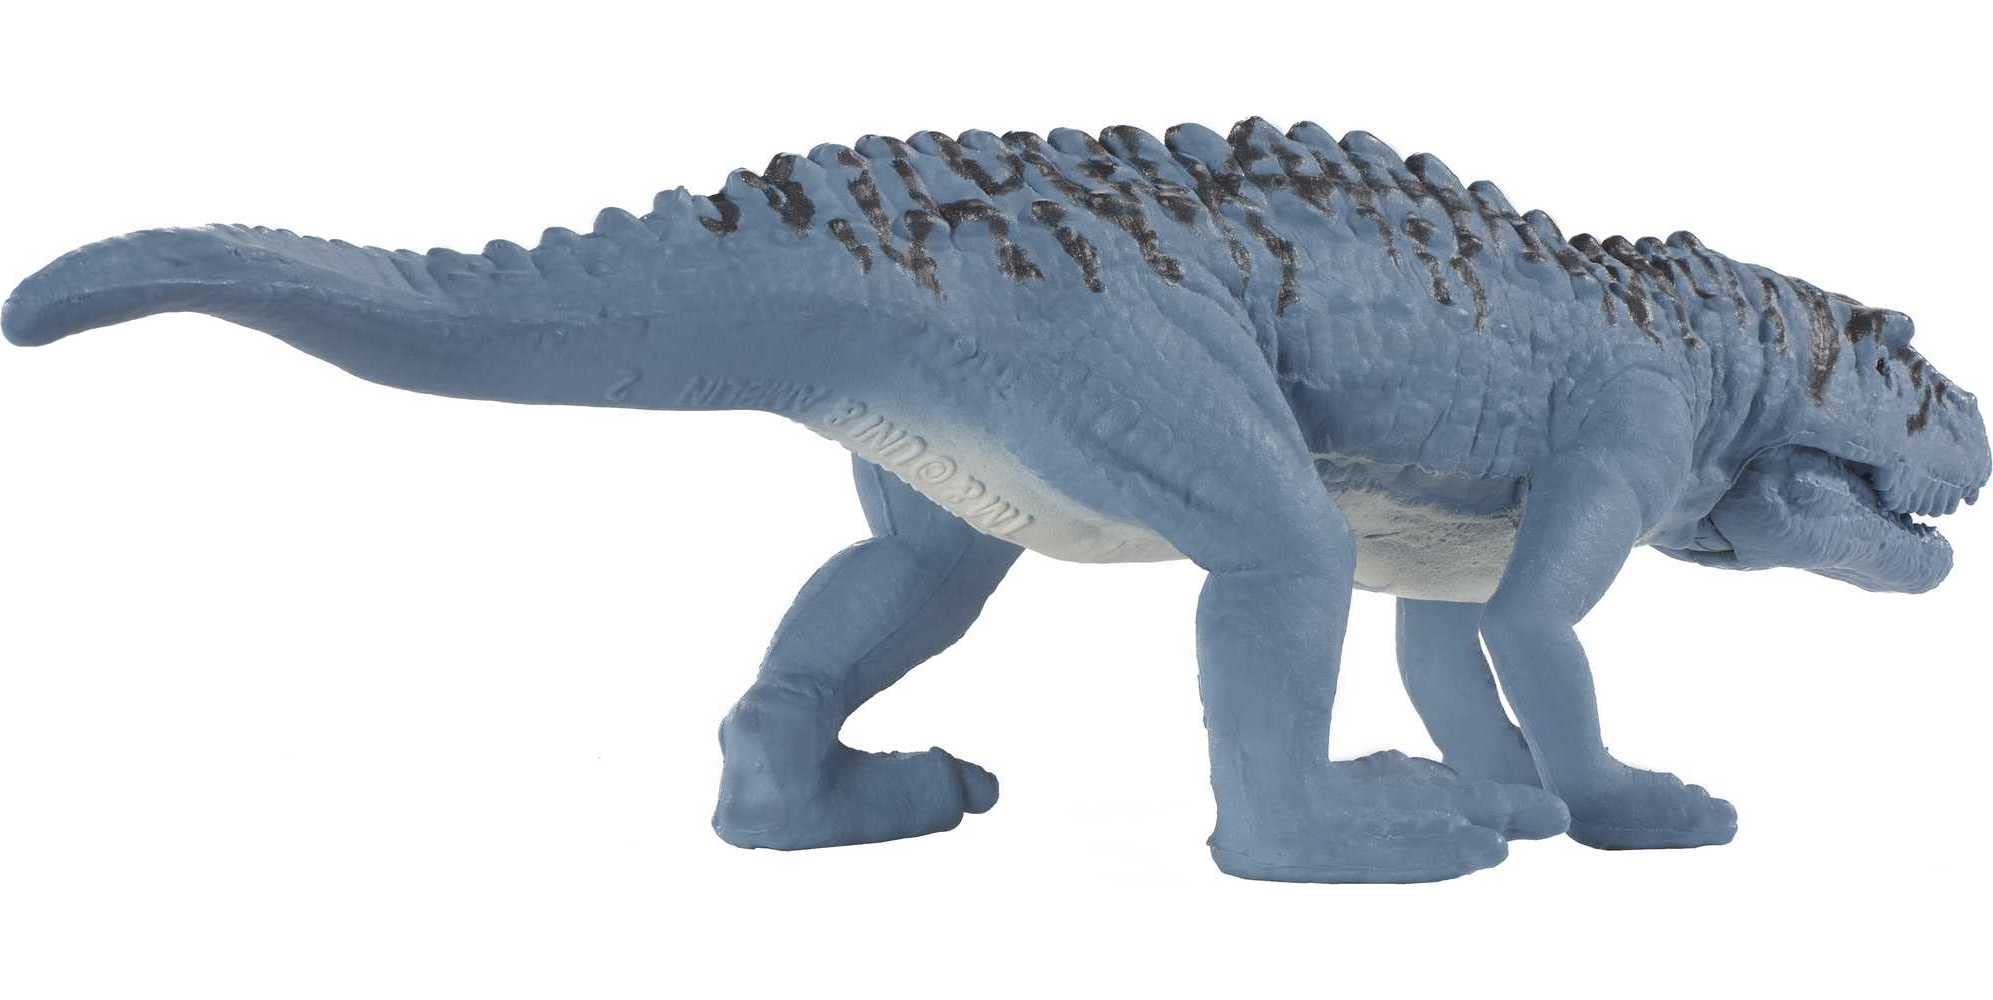 Jurassic World Mini Dinosaur Action Figure with 1 or 2 Movable Joints Iconic to Its Species, Realistic Sculpting & Decoration, Great Collectible Gift Ages 4 Years Old & Up, Styles May Vary